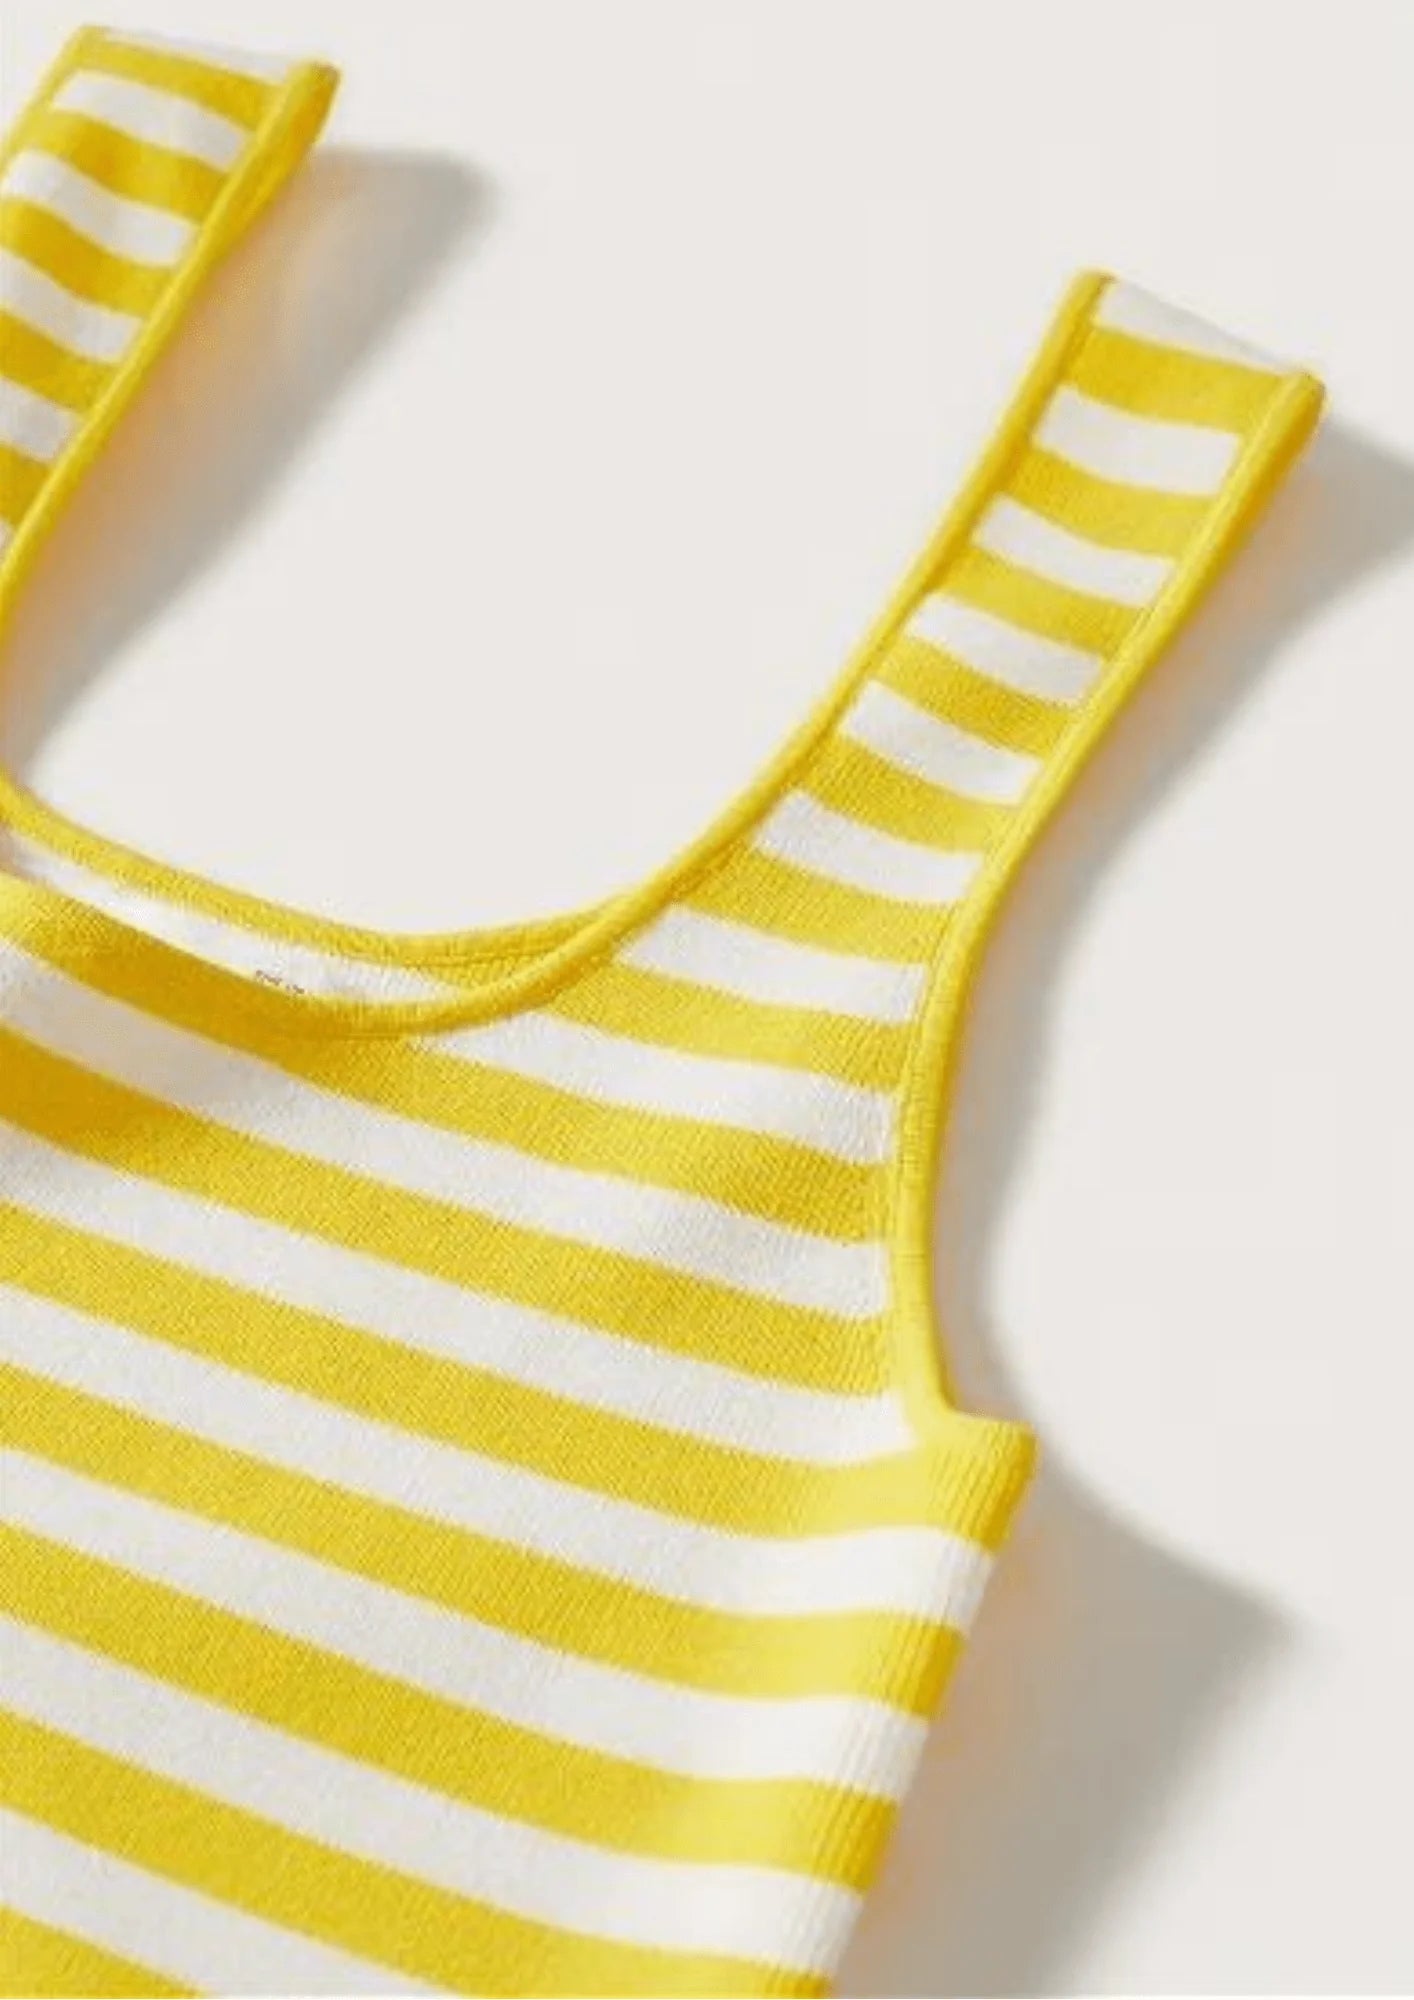 YELLOW STRIPED JERSEY TOP